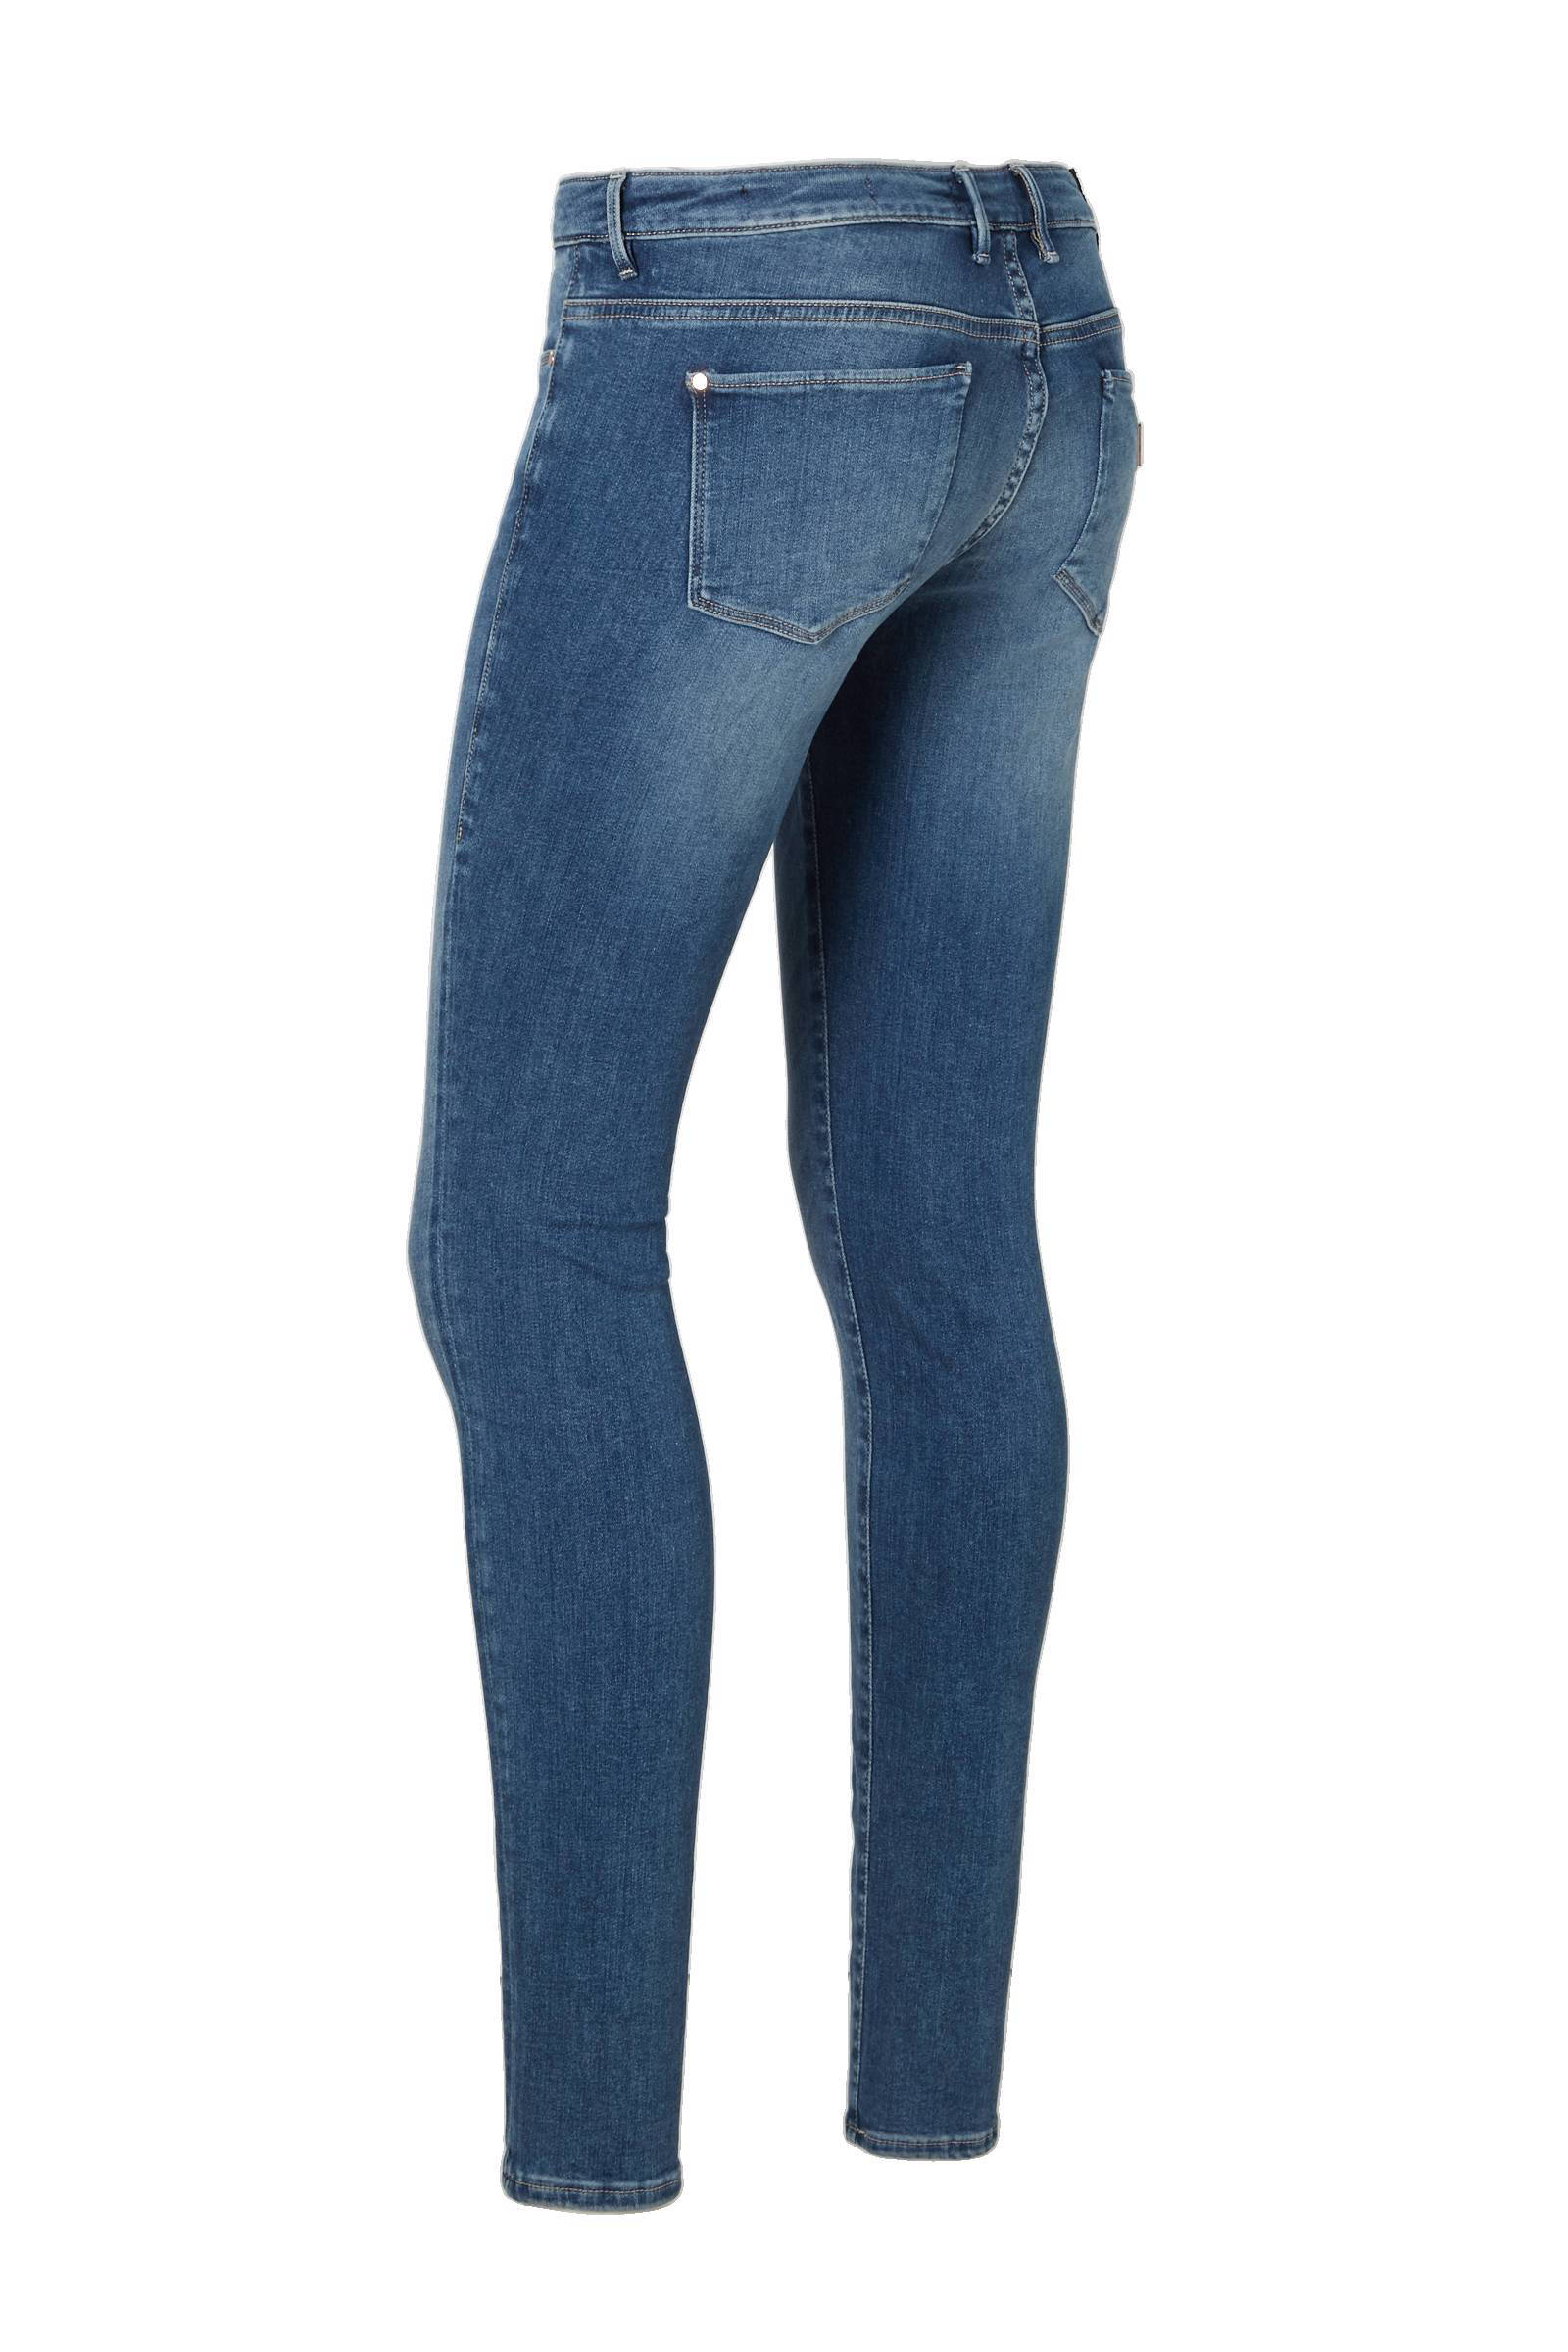 jegging ultra skinny low guess